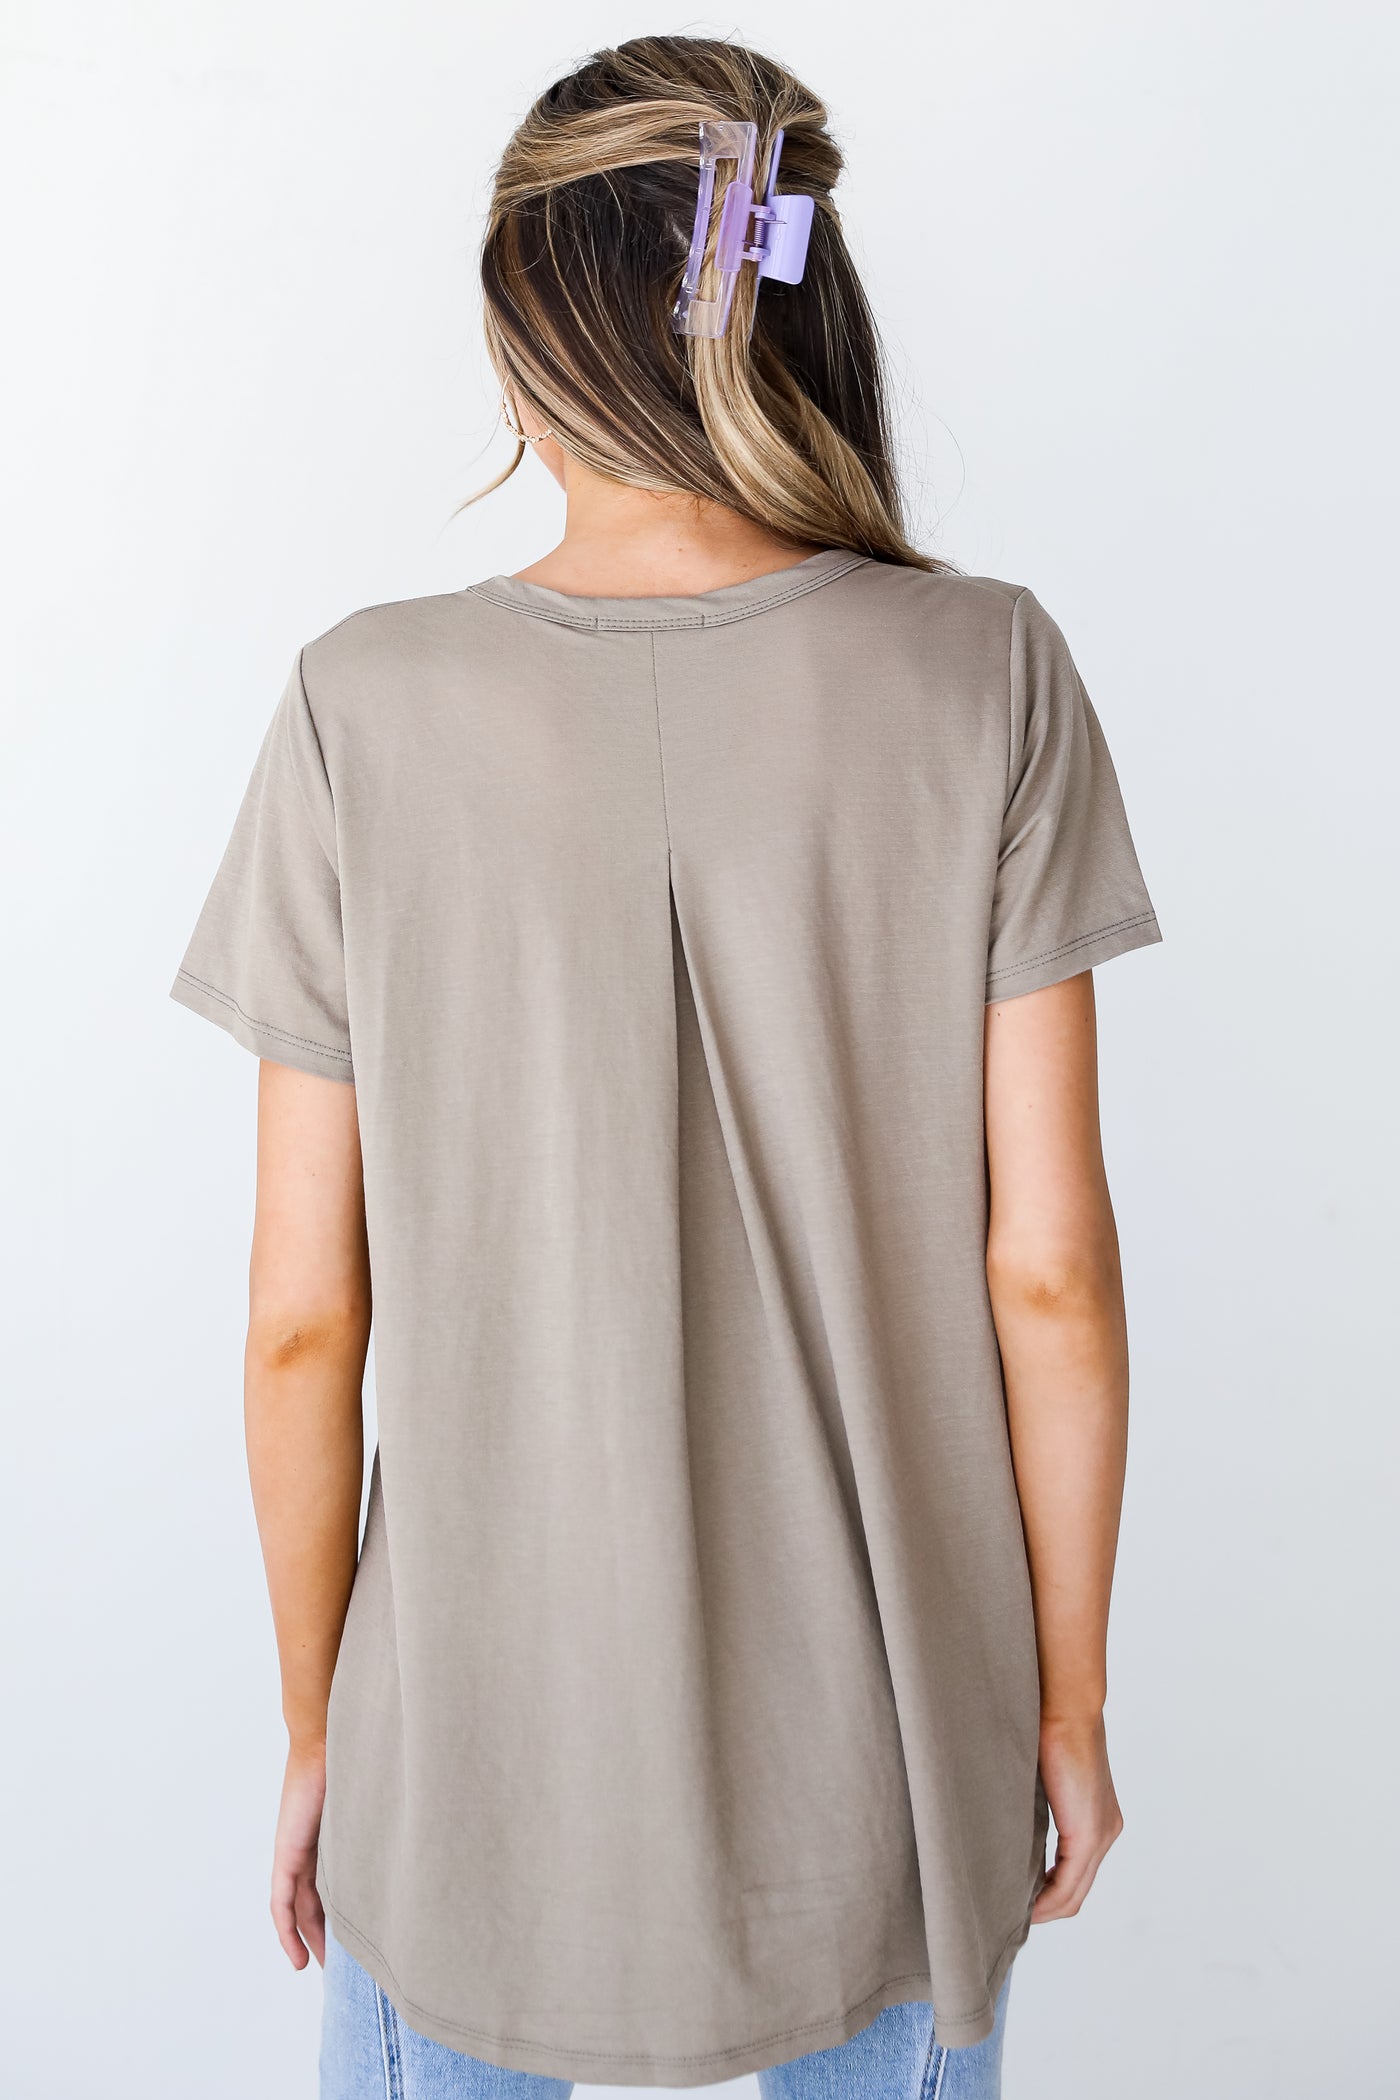 taupe Top back view